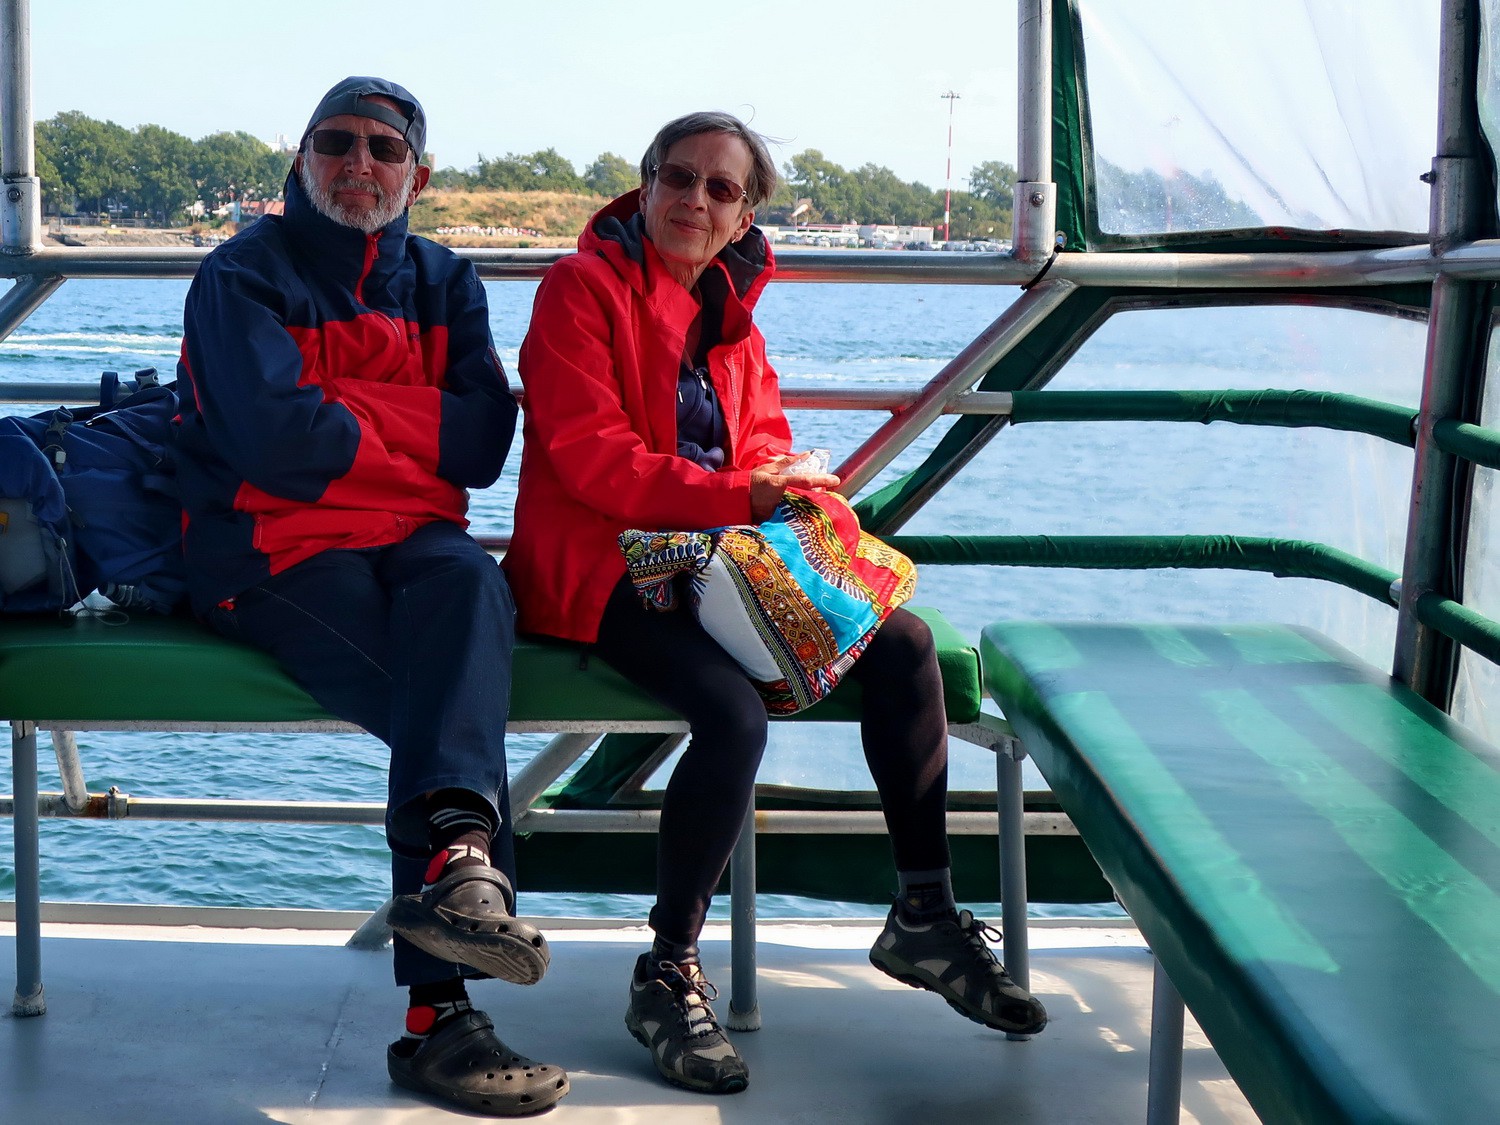 Jutta and Hermann on the bigger Whale Watching Boat